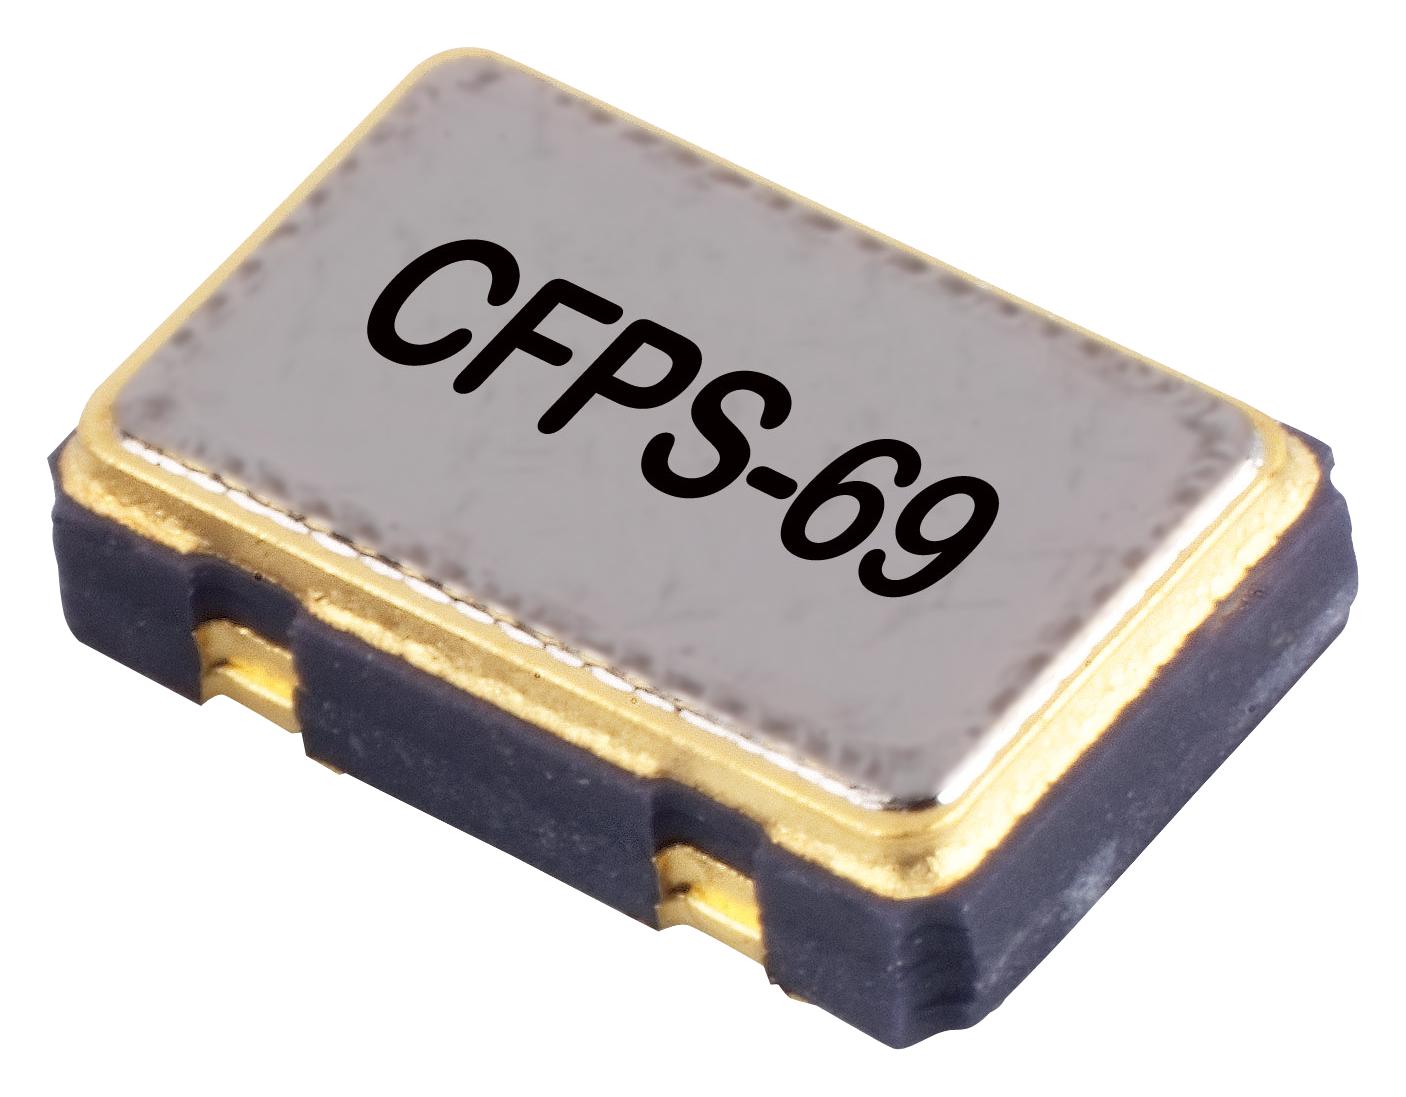 LFSPXO009581 CRYSTAL OSCILLATOR, SMD, 3.6864MHZ IQD FREQUENCY PRODUCTS